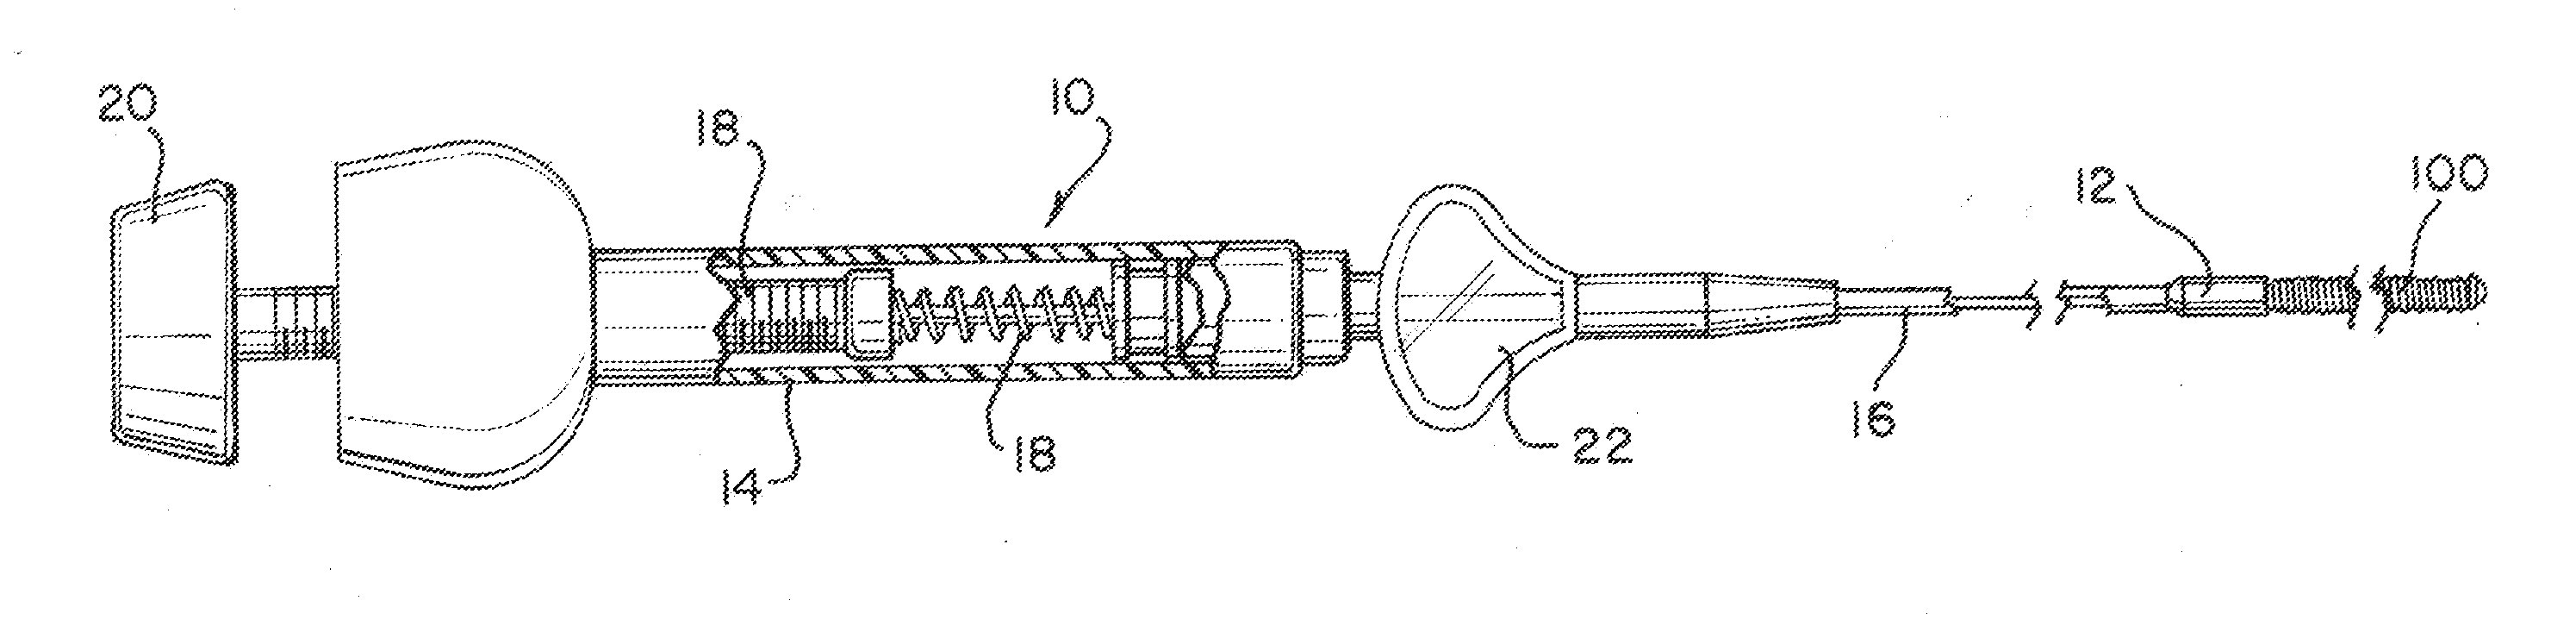 Occlusive device with porous structure and stretch resistant member